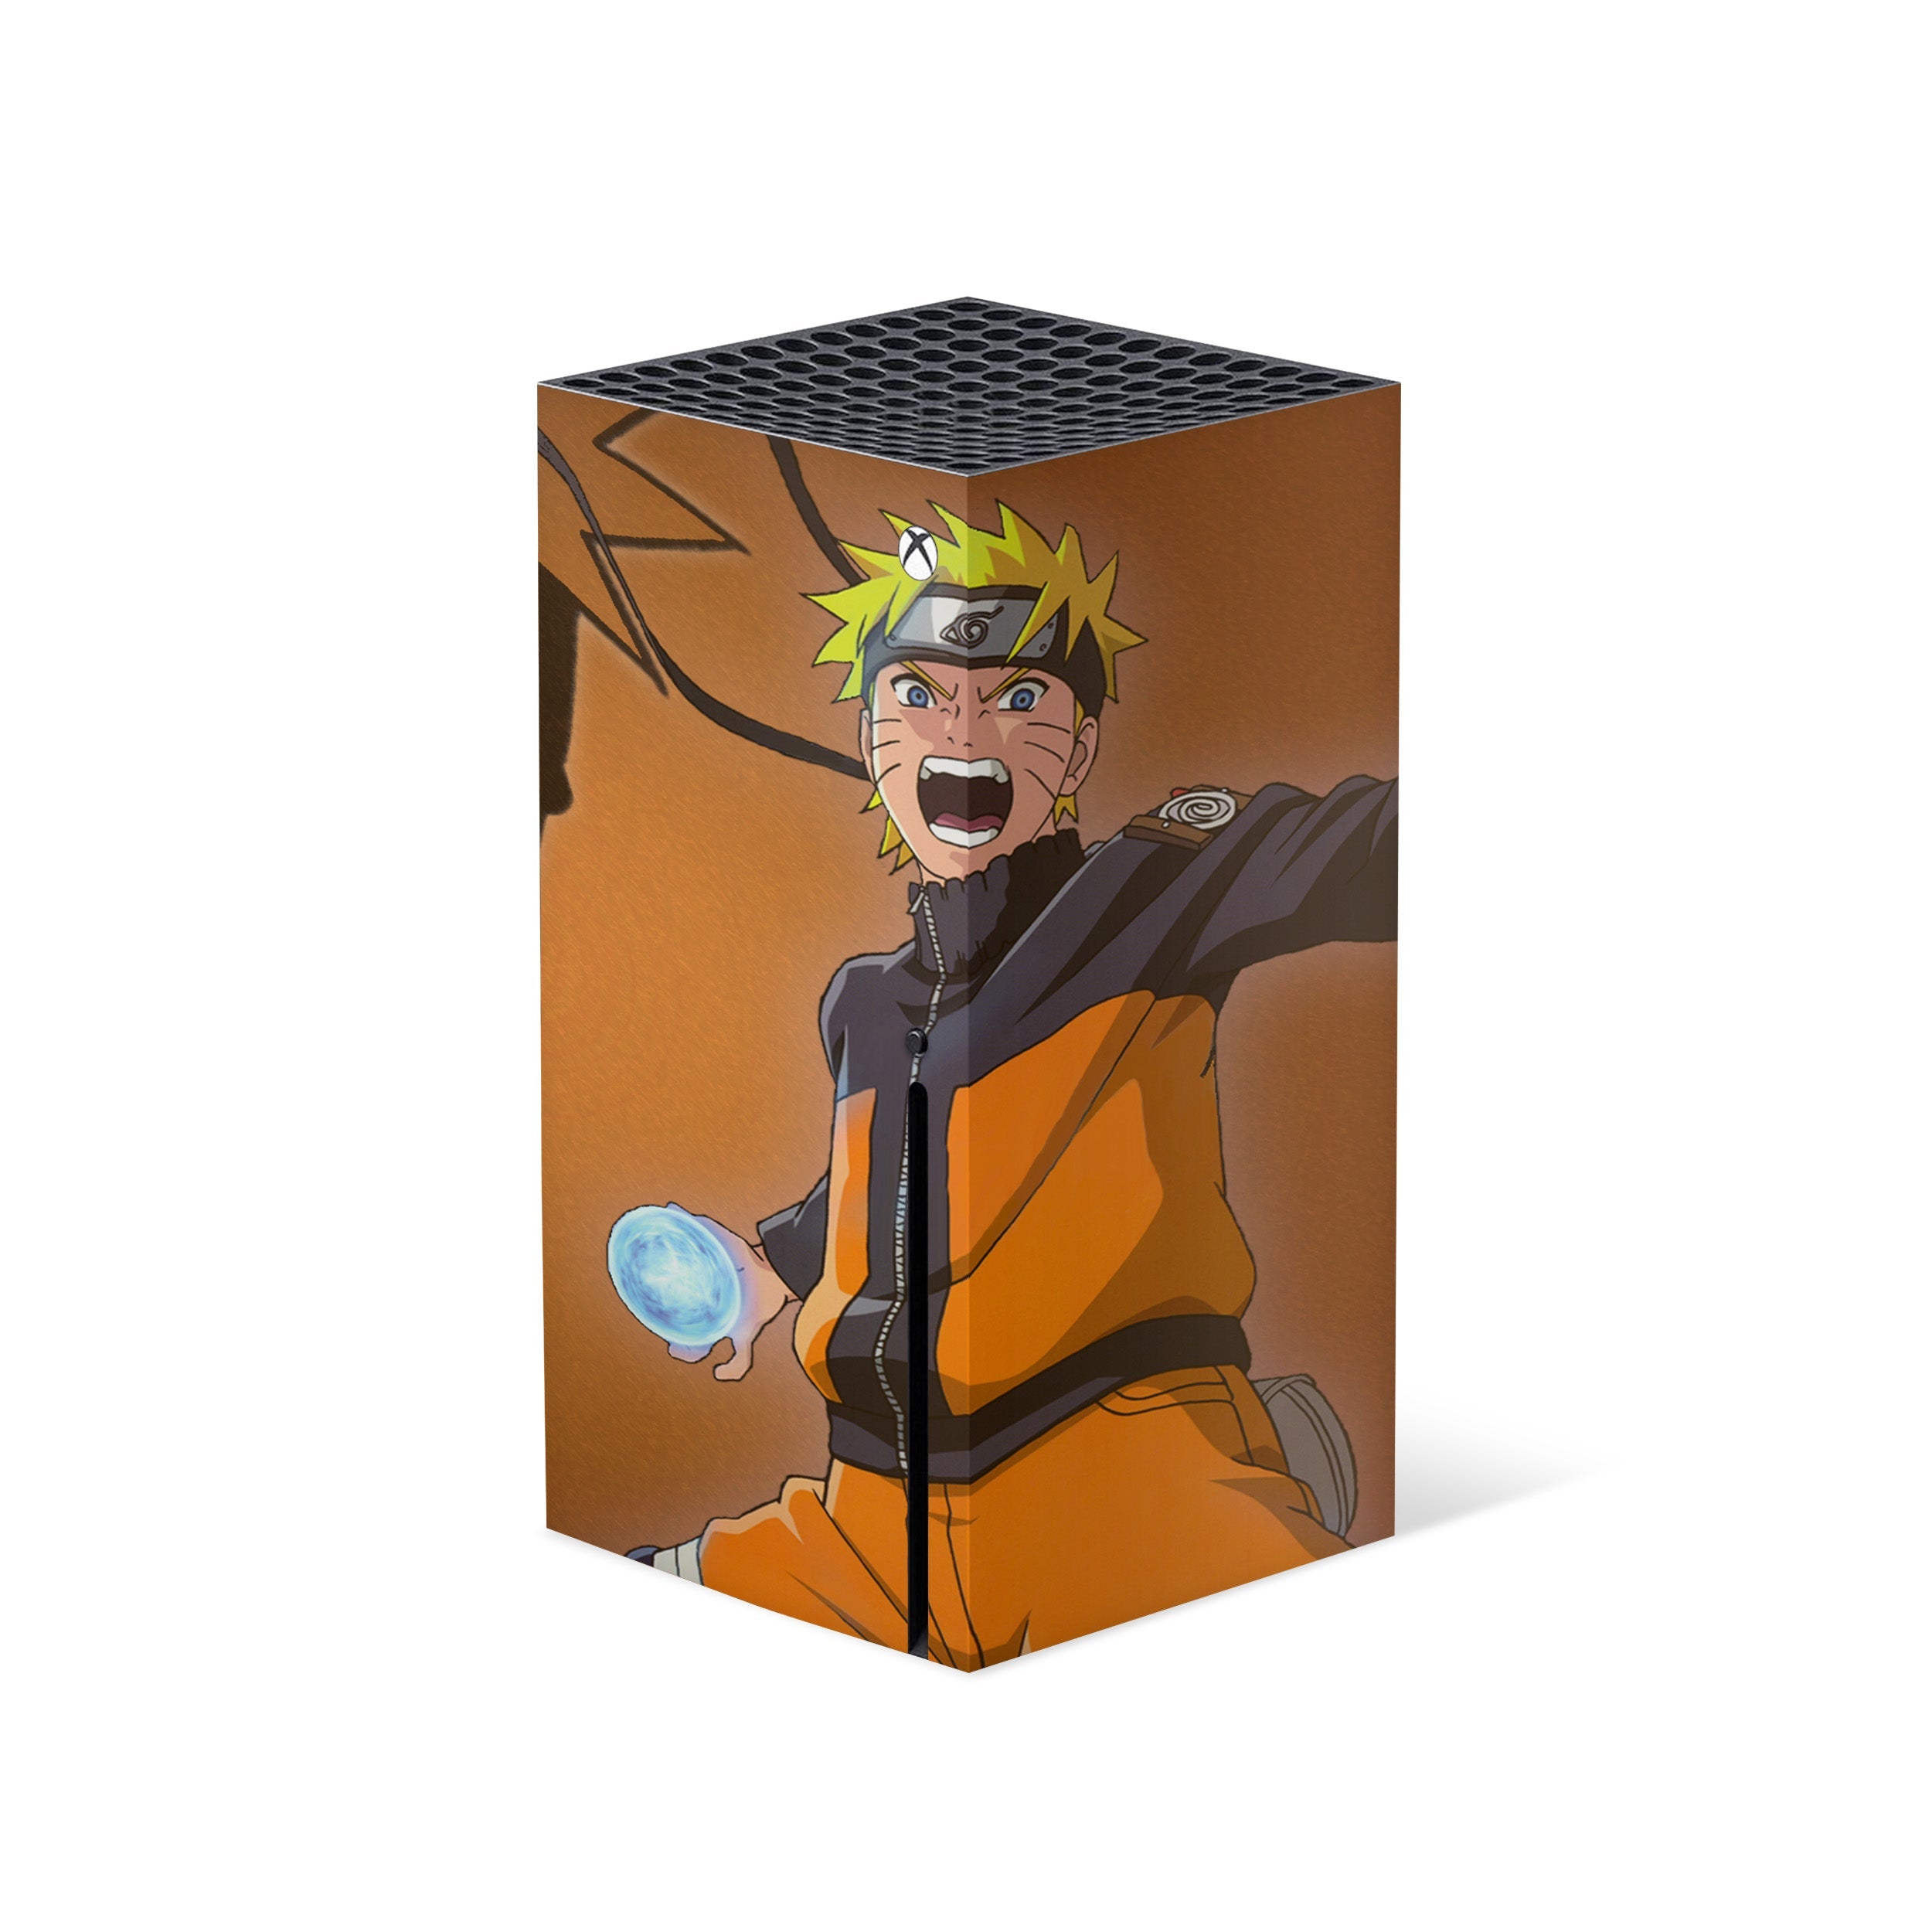 A video game skin featuring a Naruto design for the Xbox Series X.